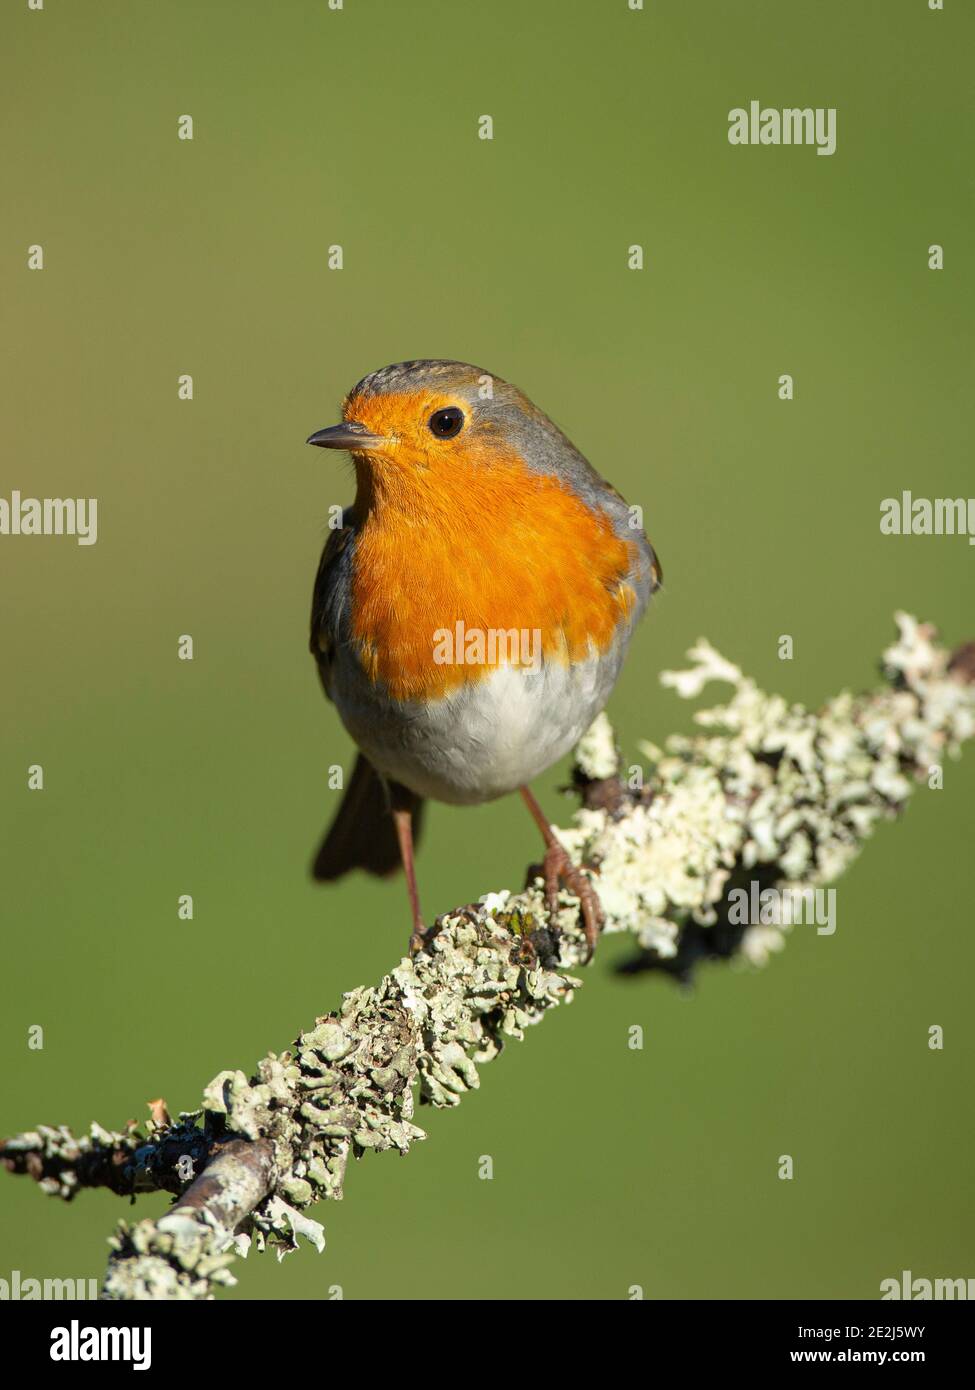 Front view of a European Robin (Erithacus rubecula) on a branch full of Lichen on a blurry green background Stock Photo